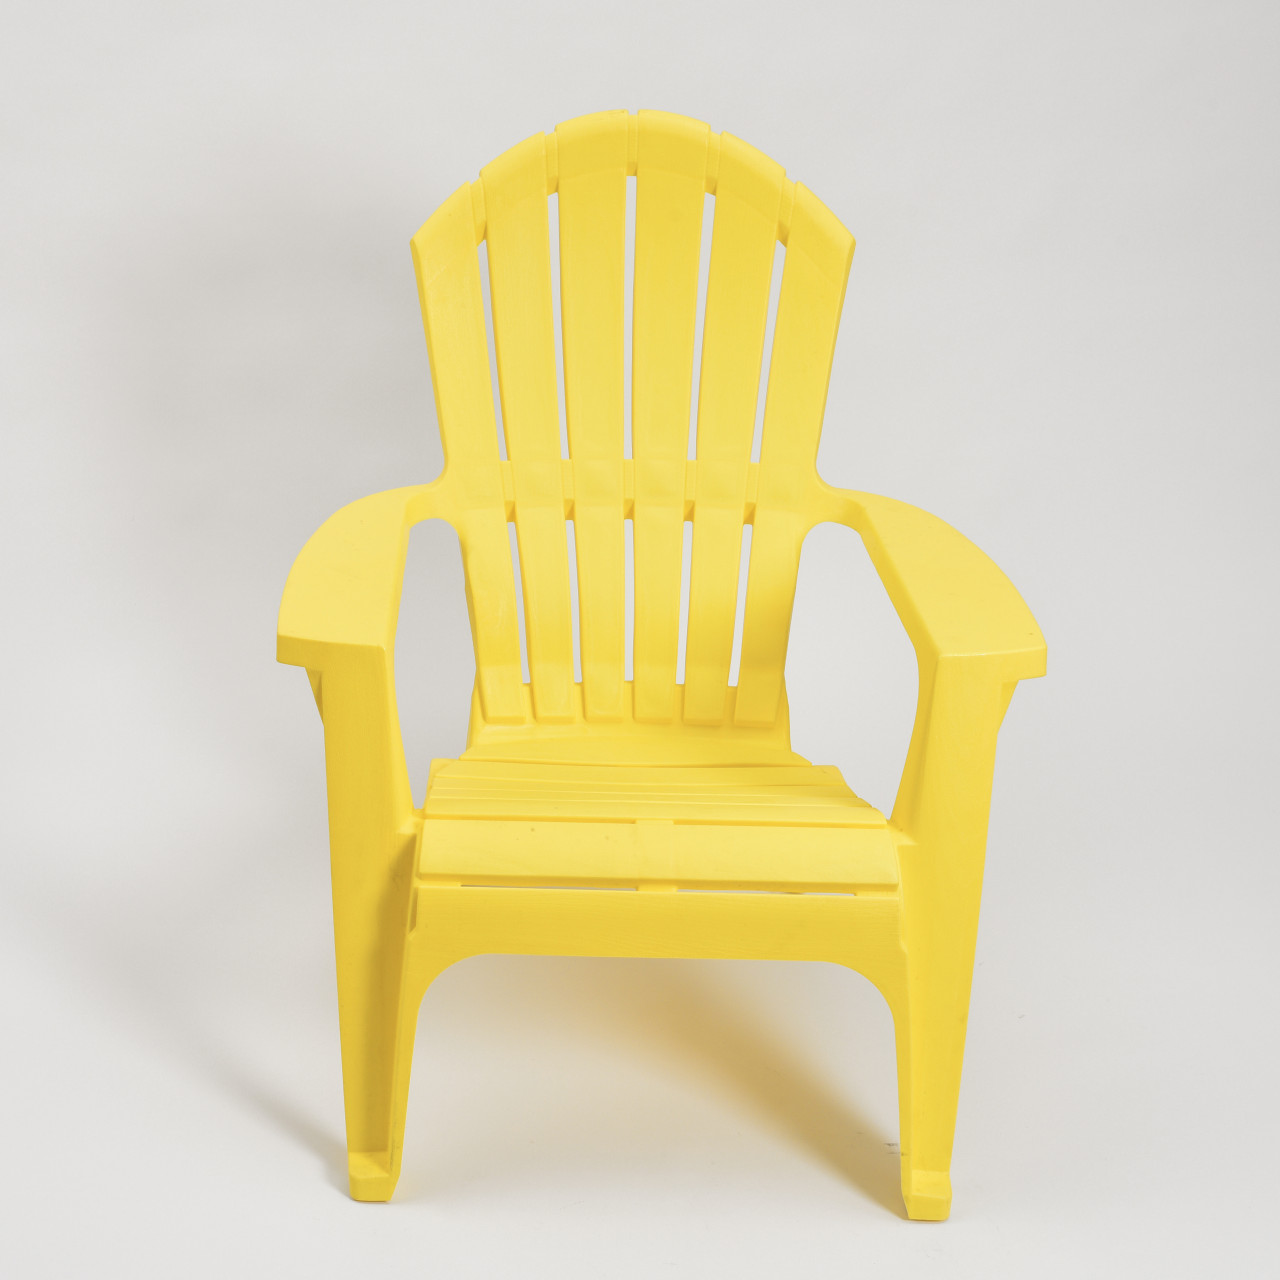 Yellow Plastic Adirondack Chair Tables / Chairs